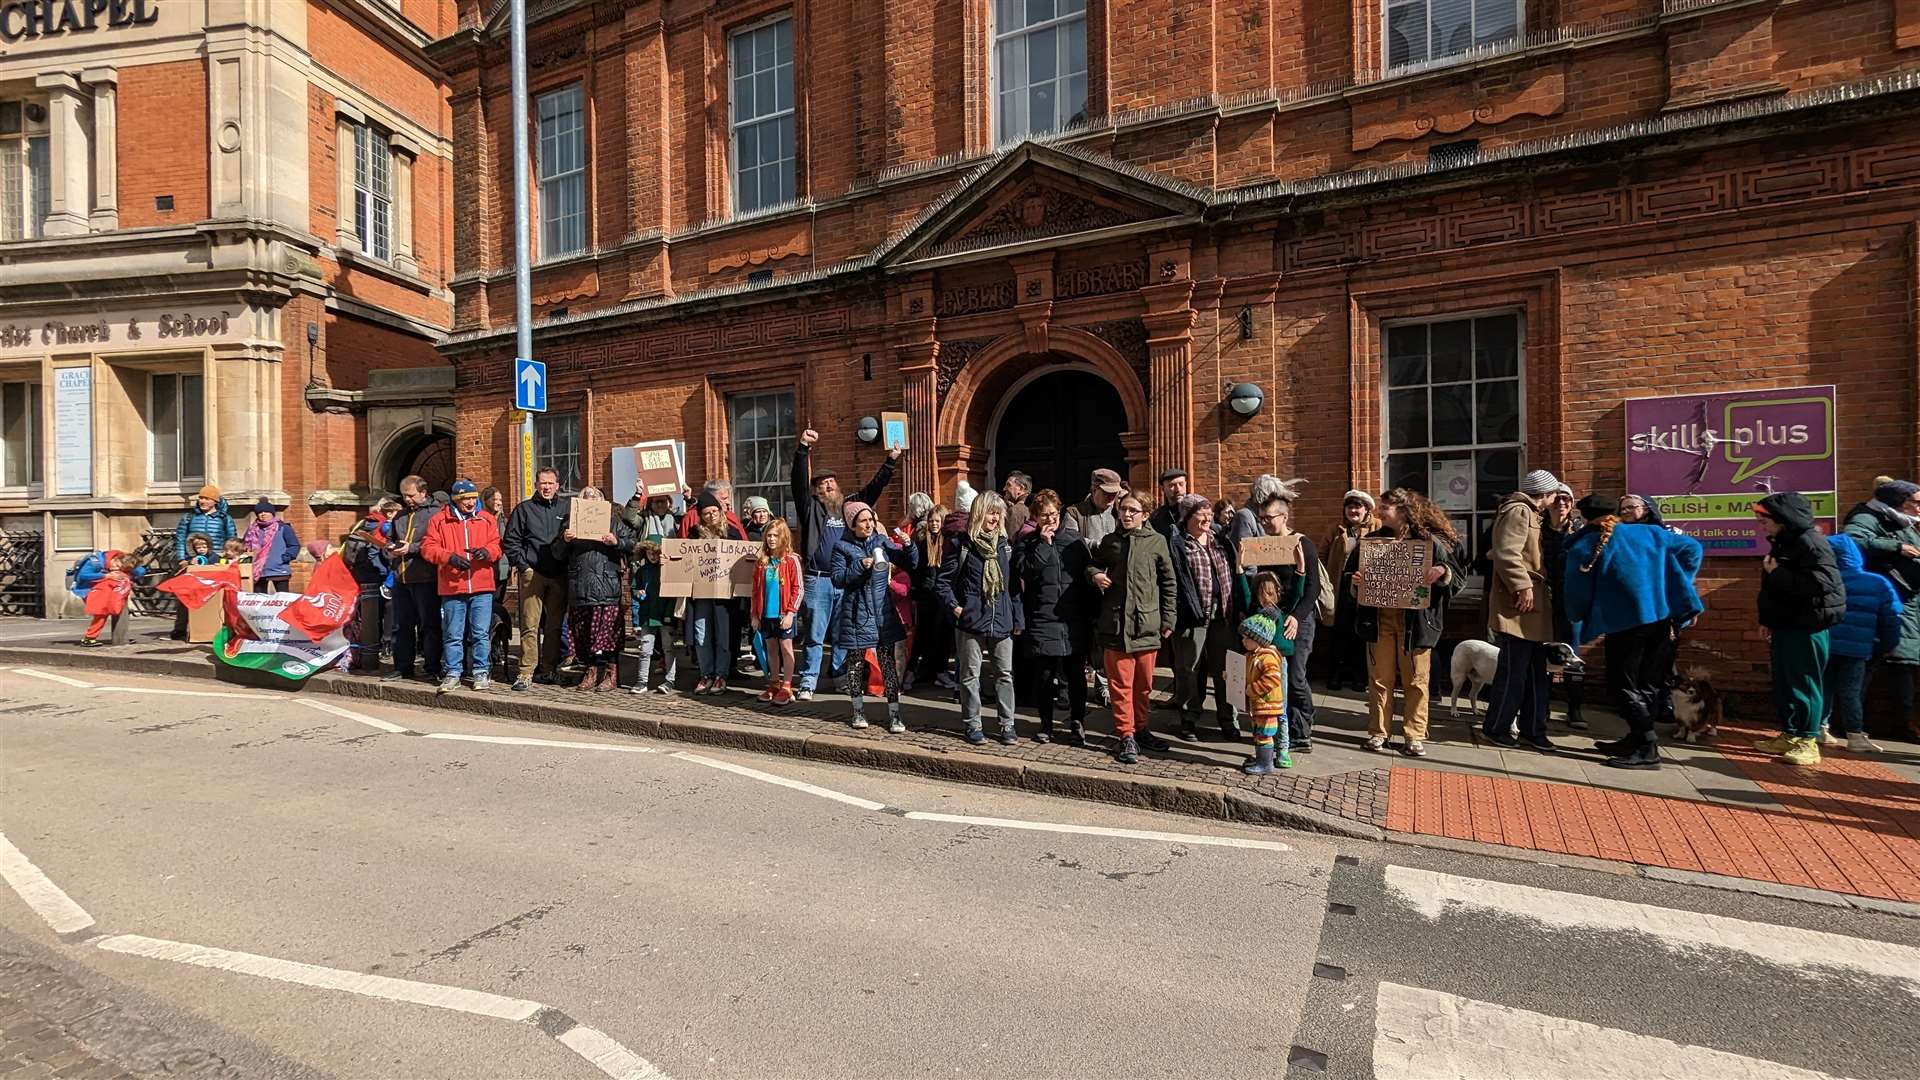 Folkestone residents have gathered outside the library to protest its closure